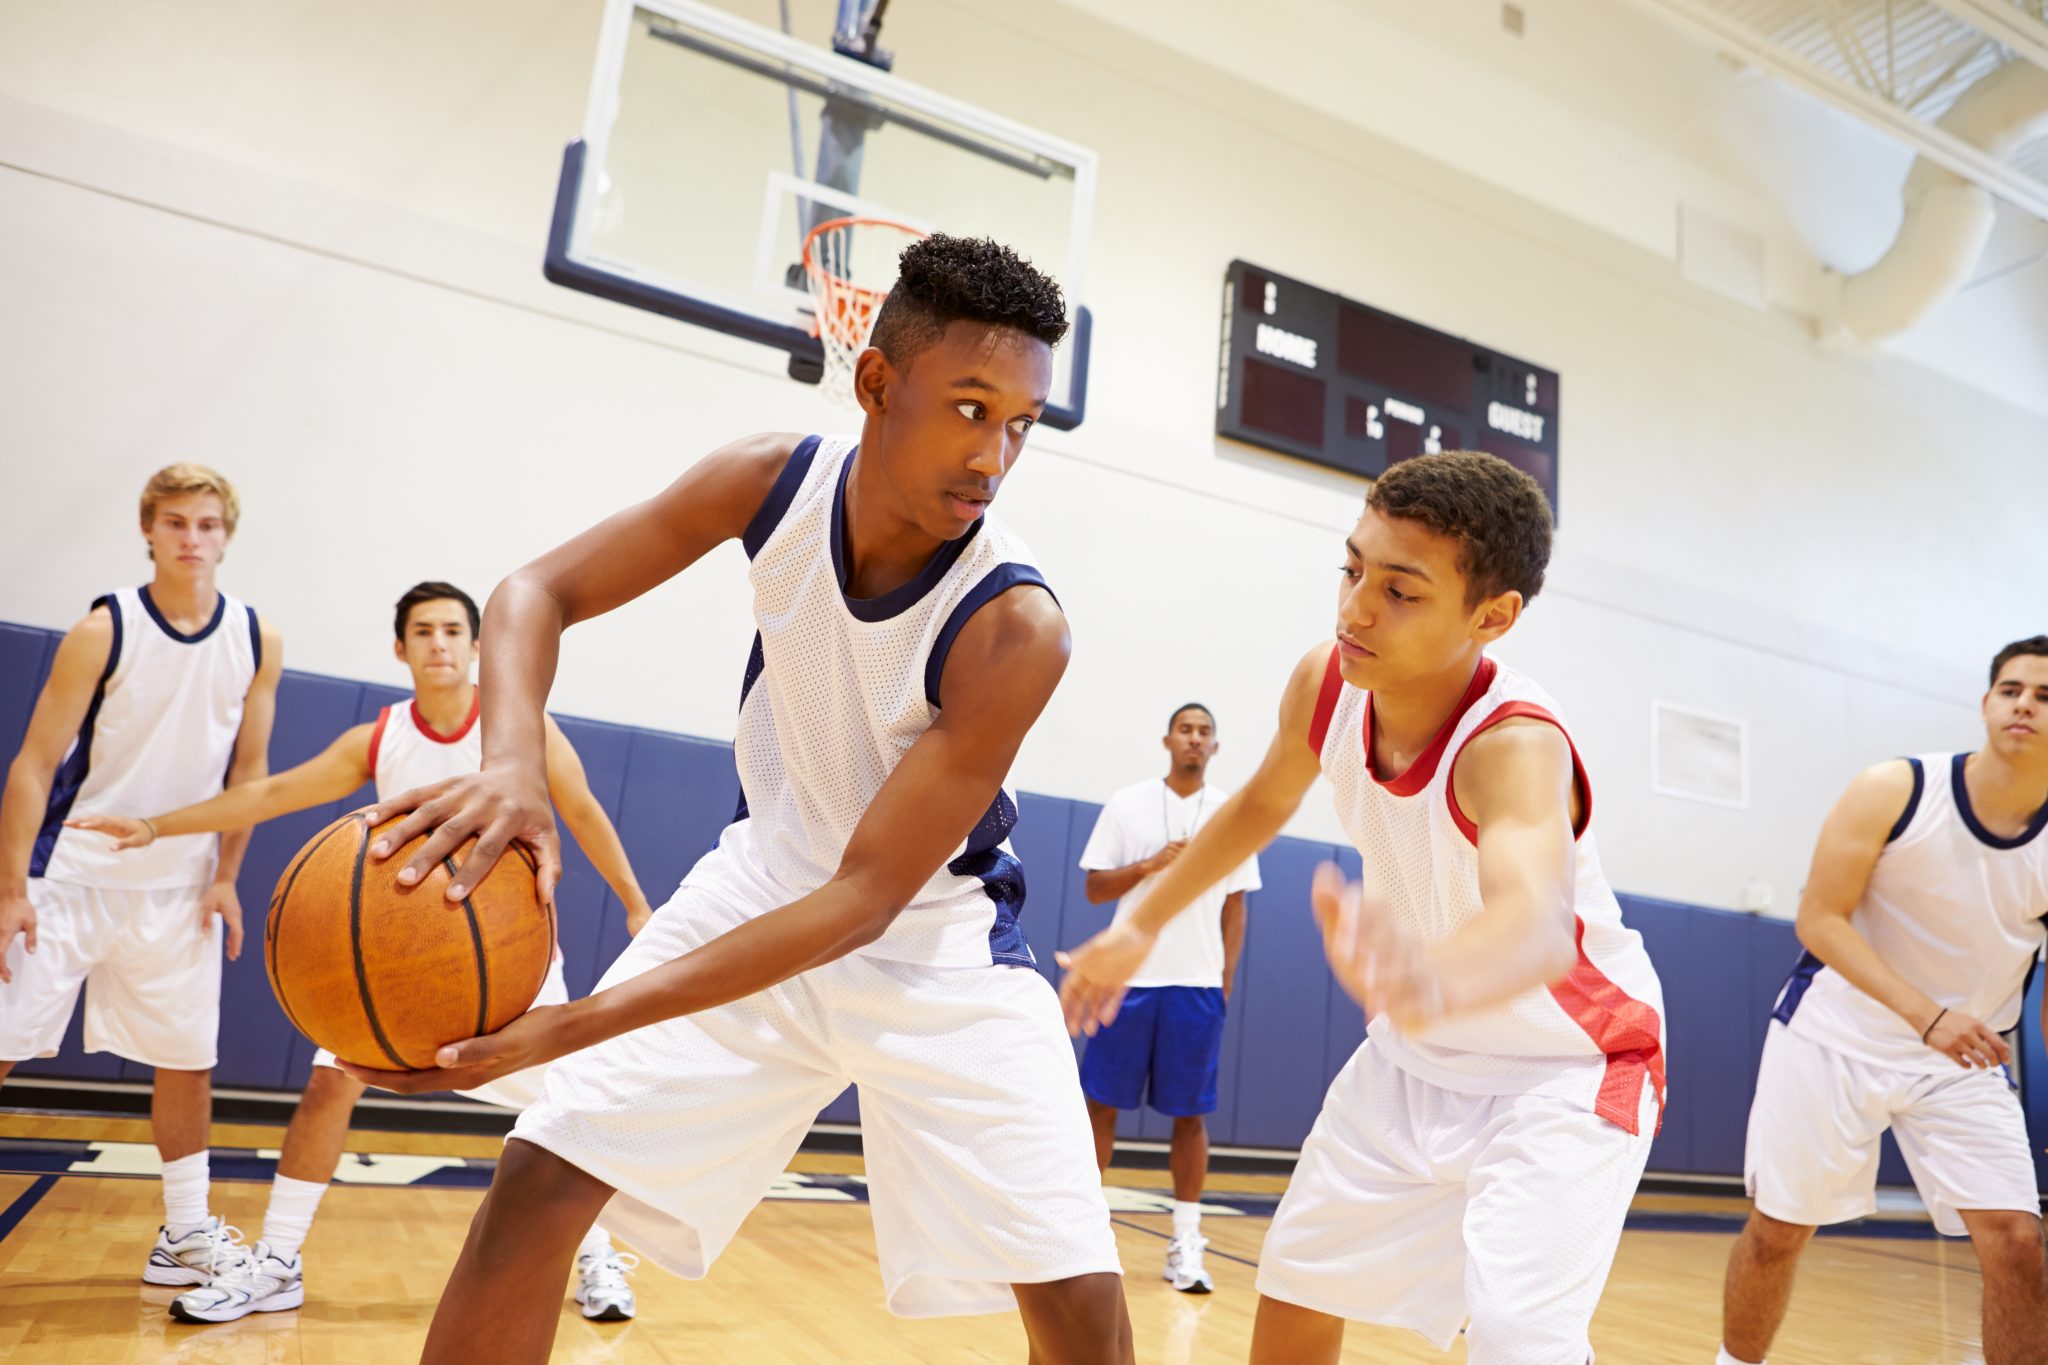 how youth sport harms mental health